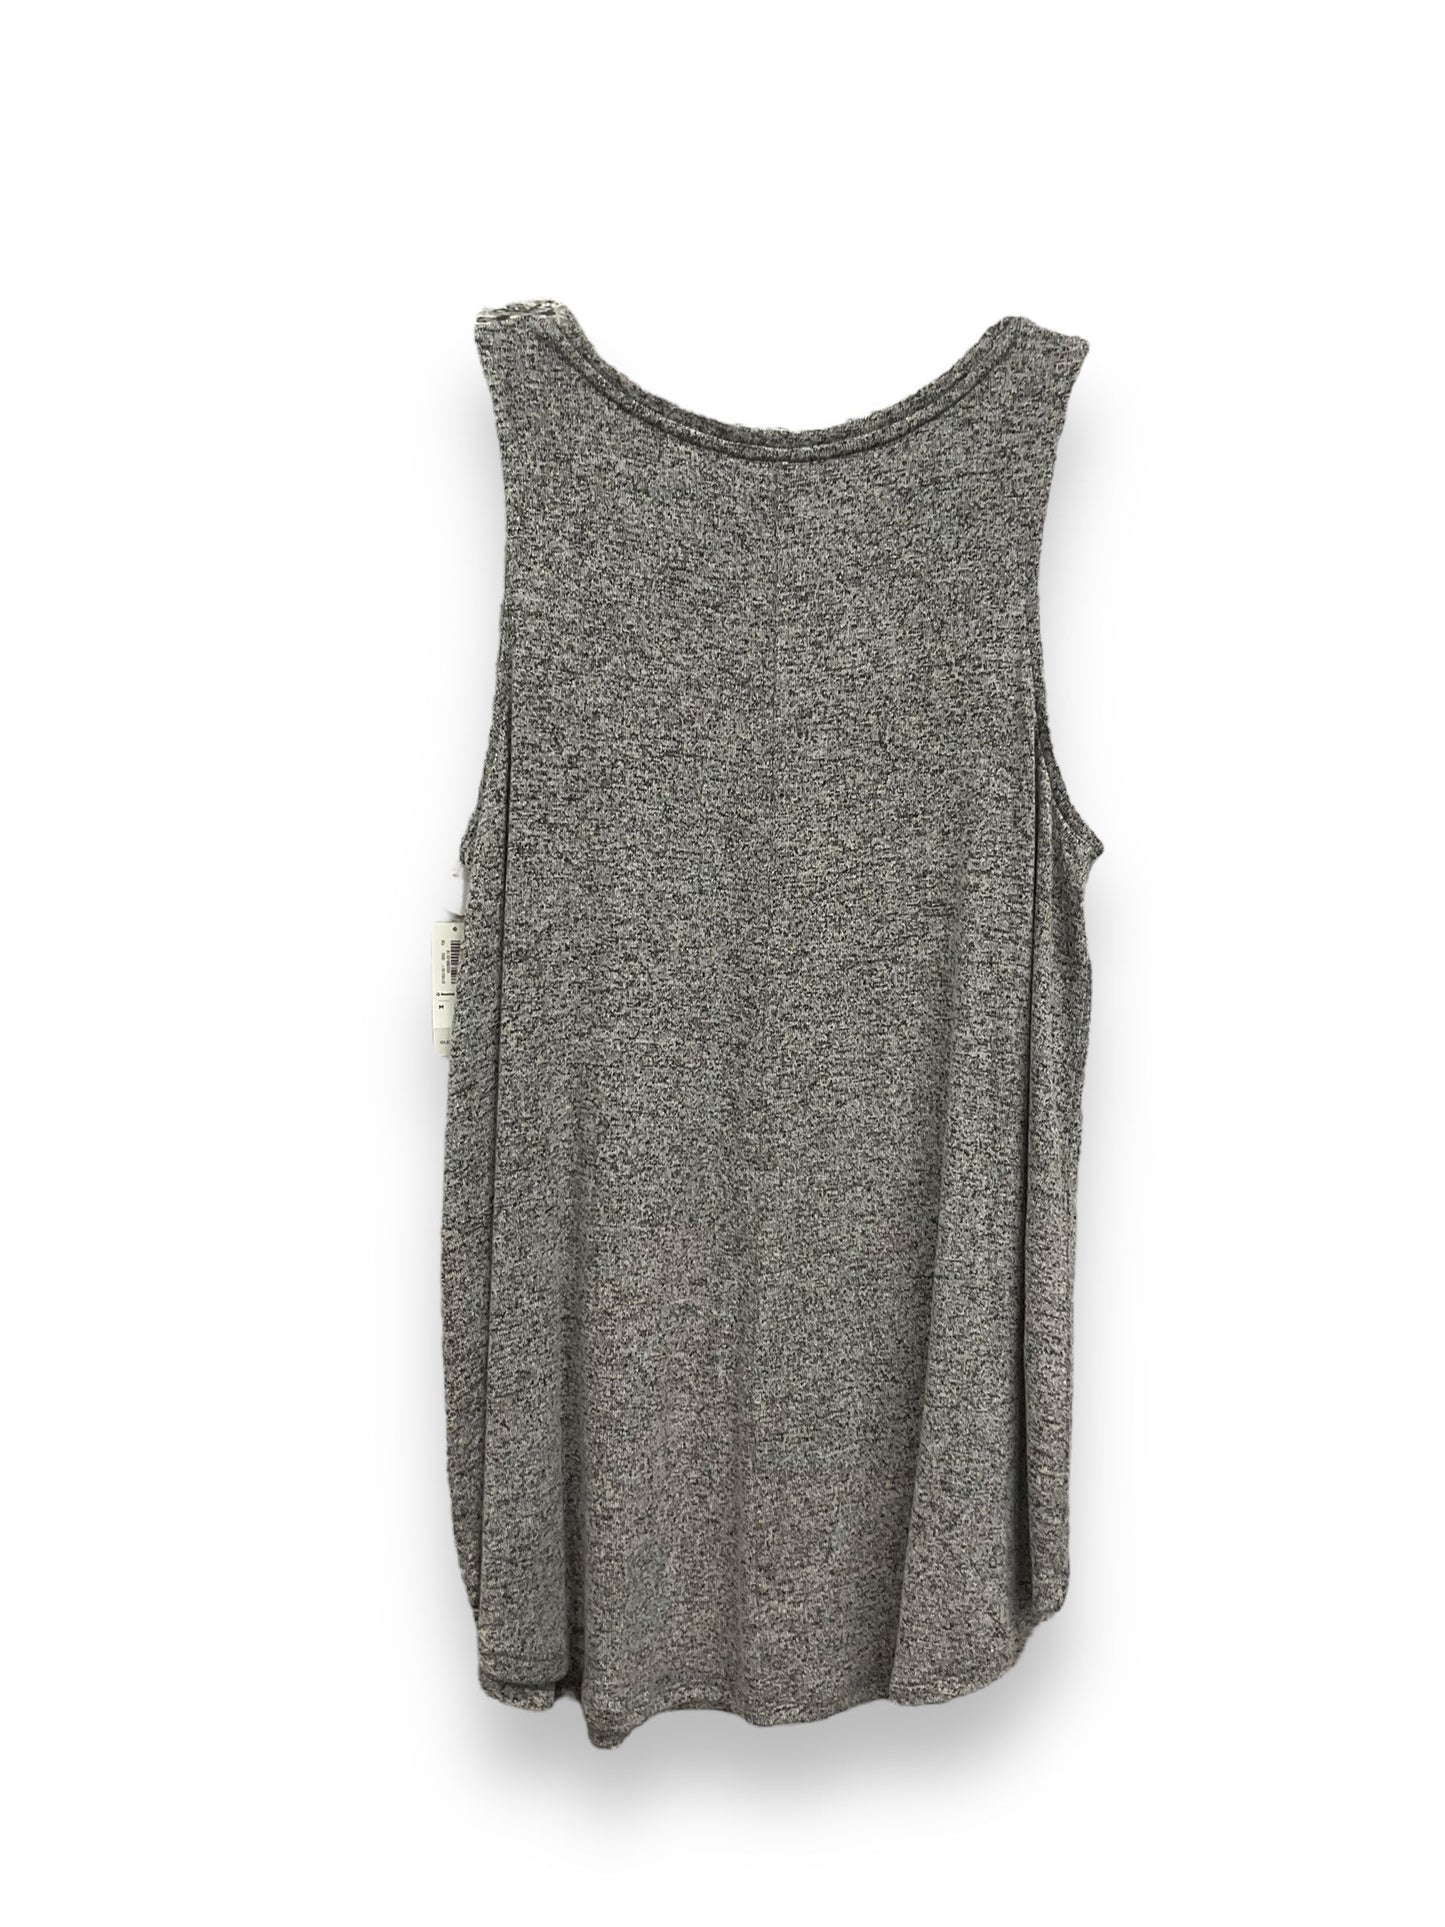 Grey Tank Top Old Navy, Size M